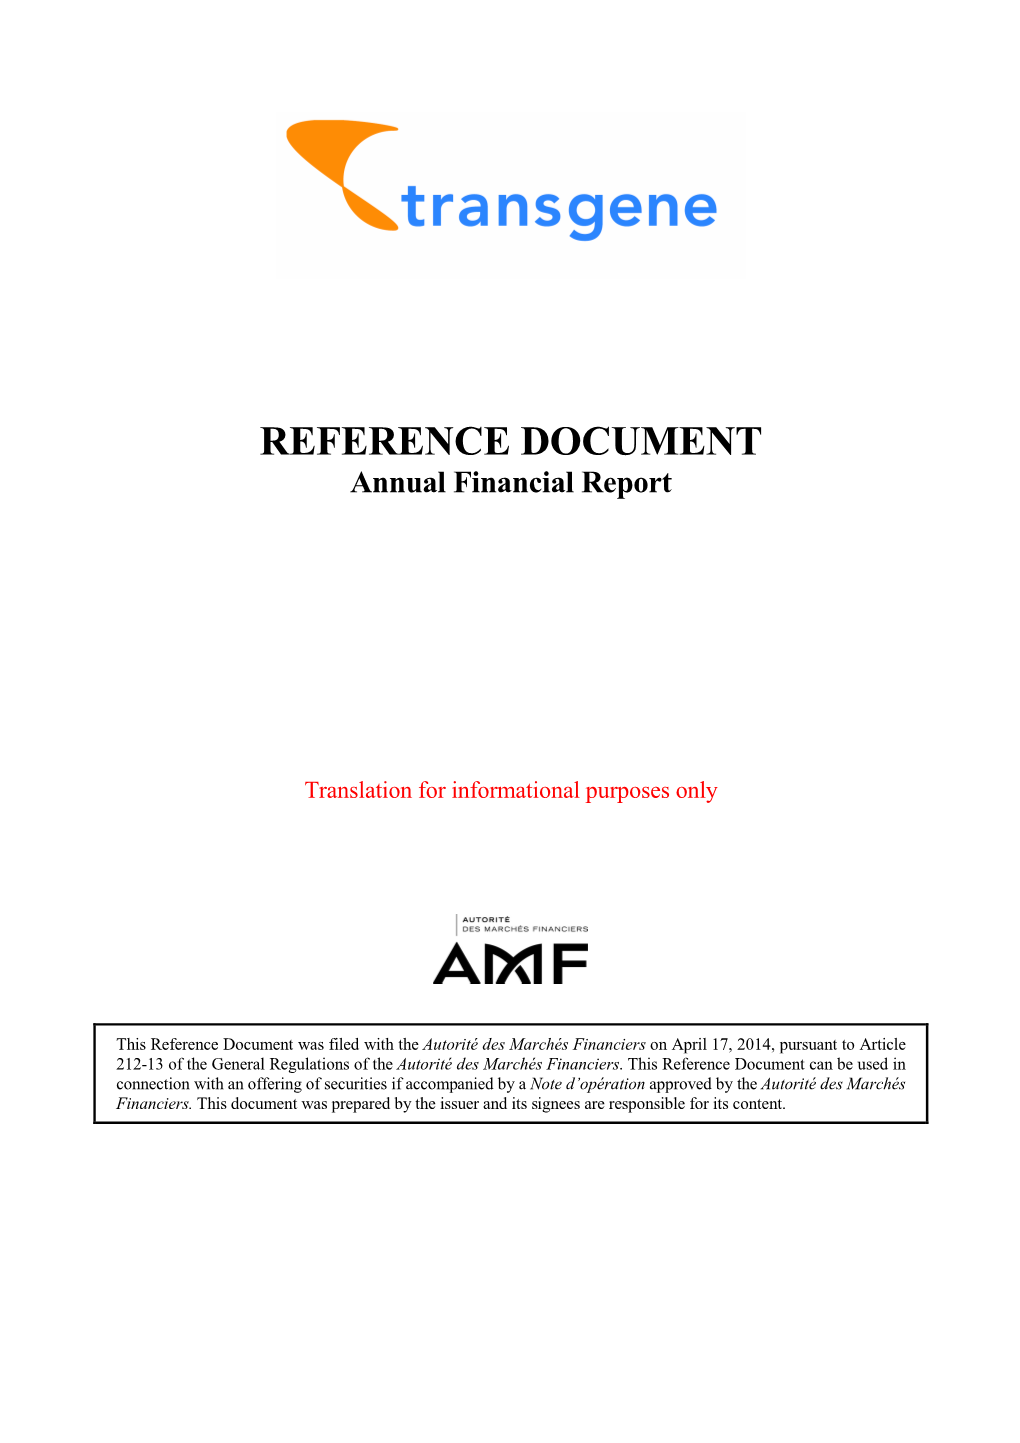 REFERENCE DOCUMENT Annual Financial Report